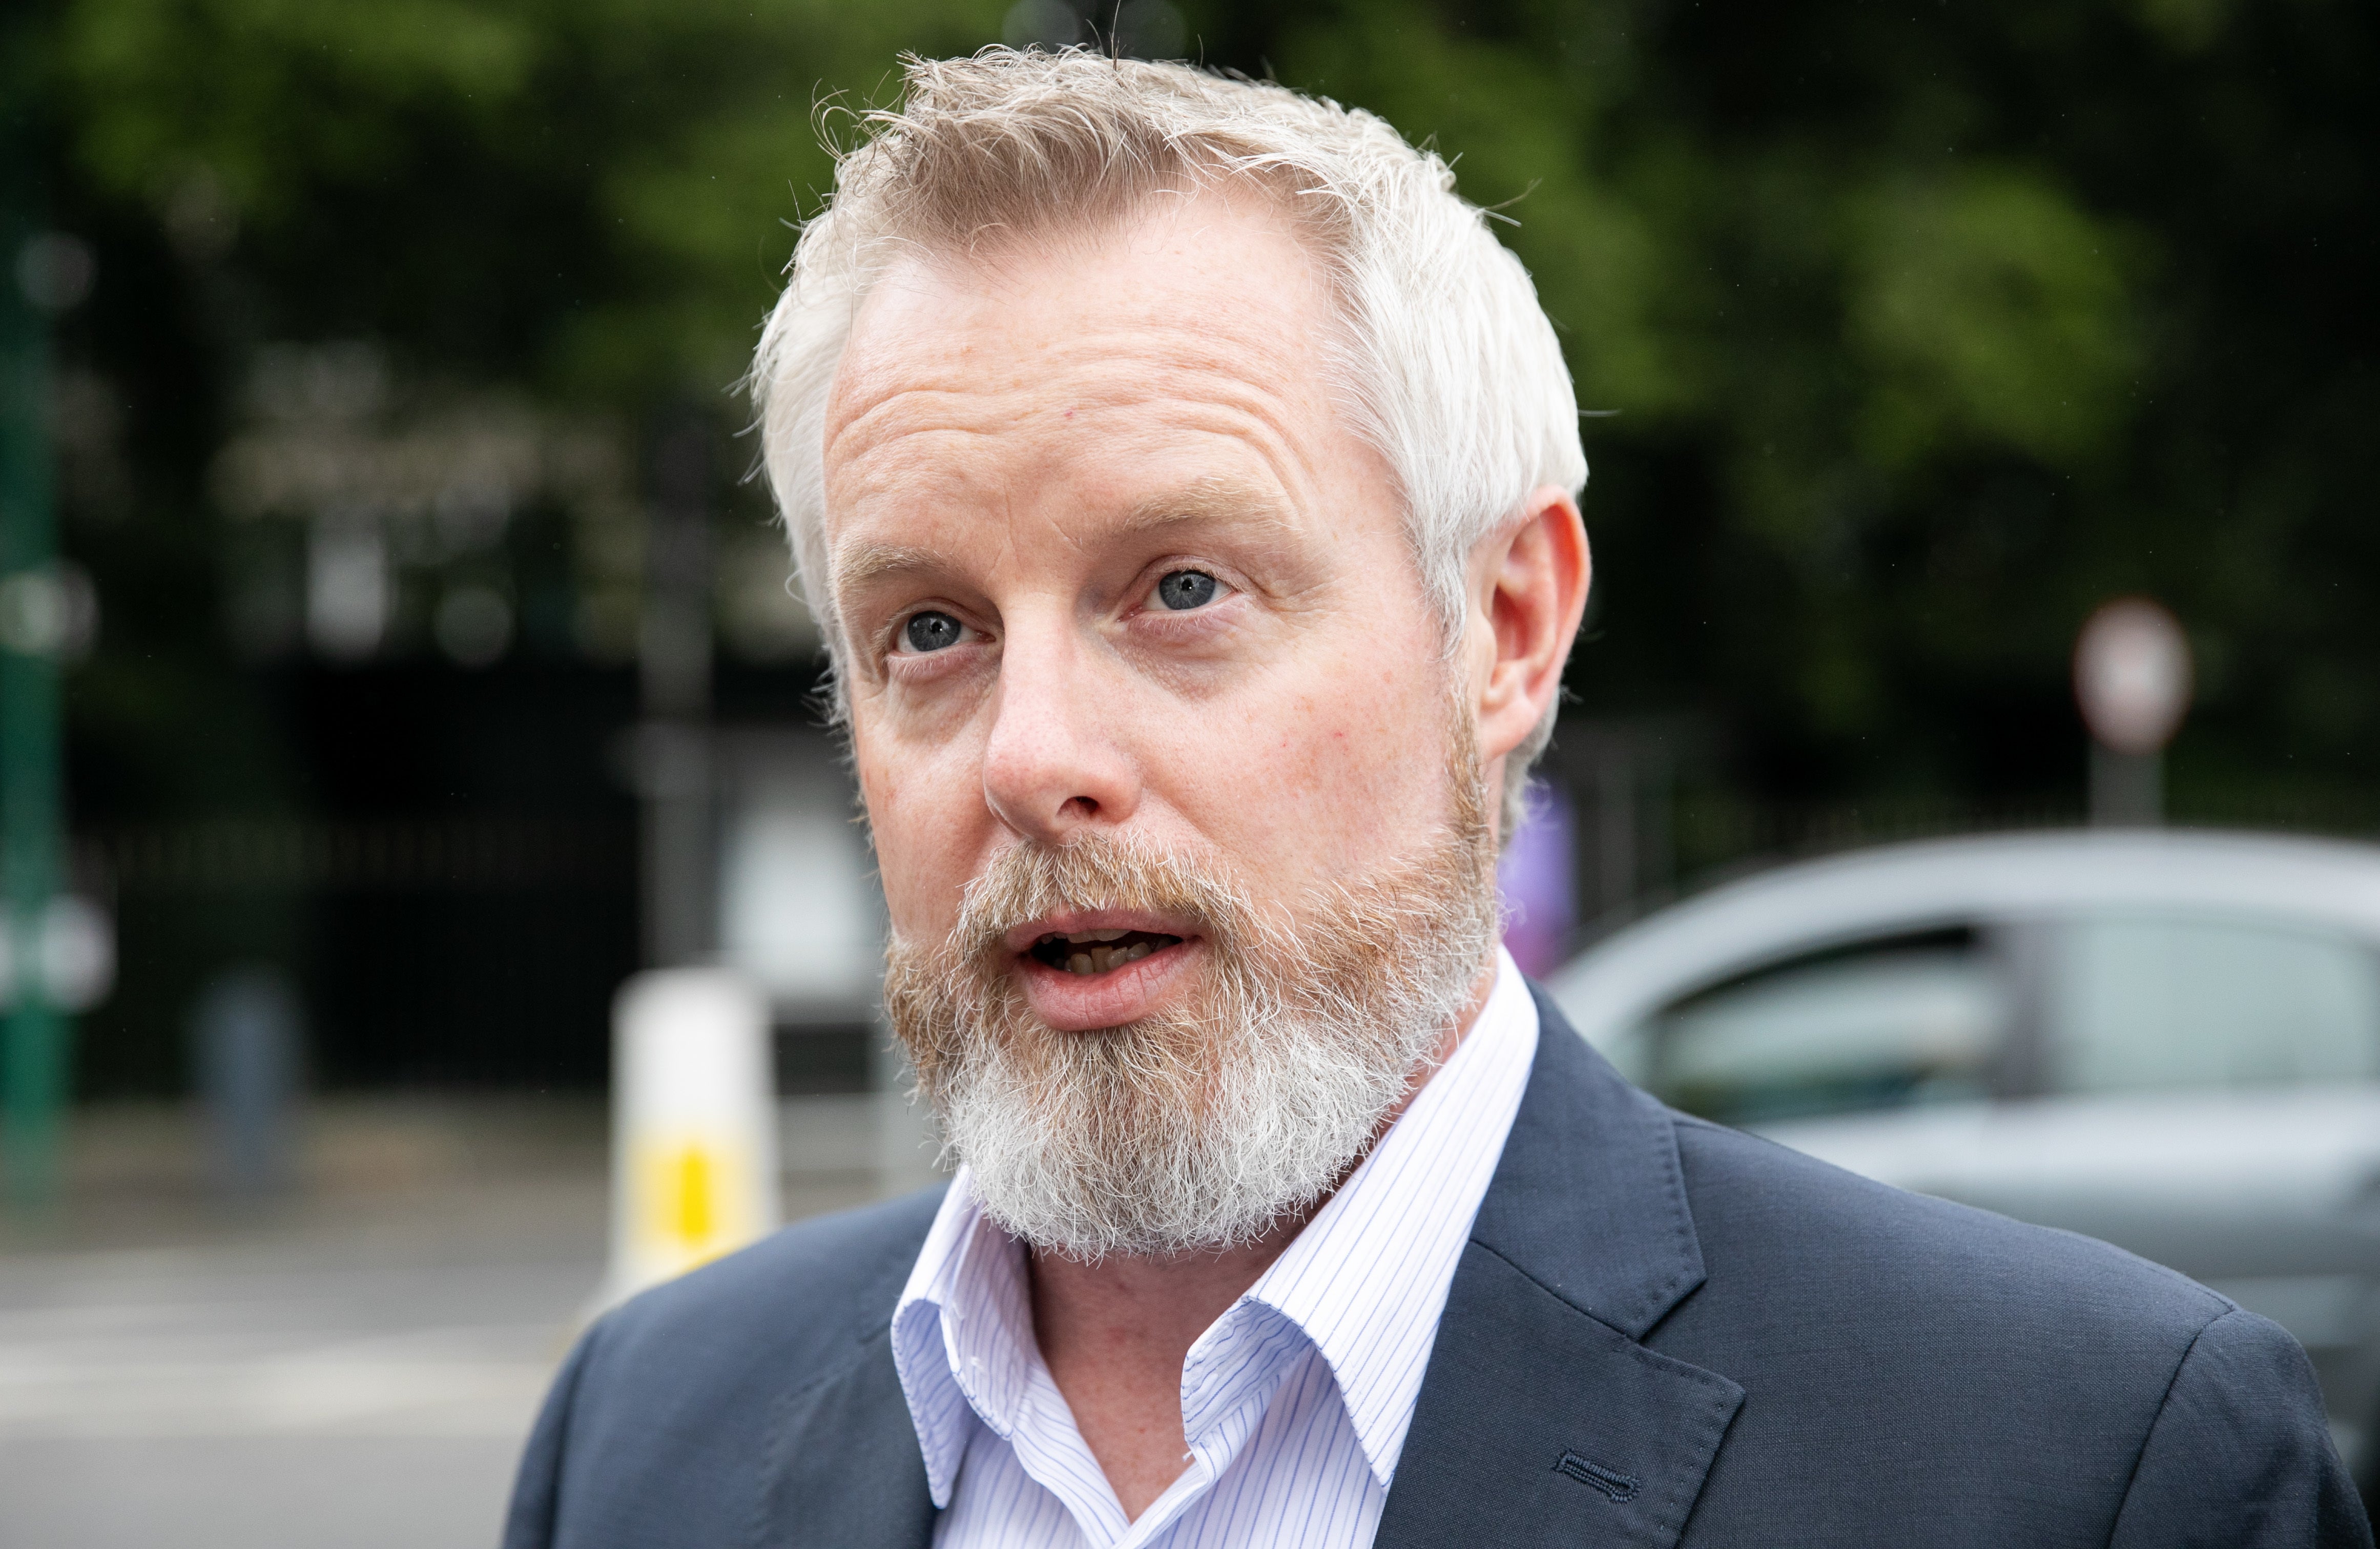 Ialpa president Captain Mark Tighe said the union had asked the Labour Court to consider how a reasonable claim protects workers from inflation (Gareth Chaney/PA)